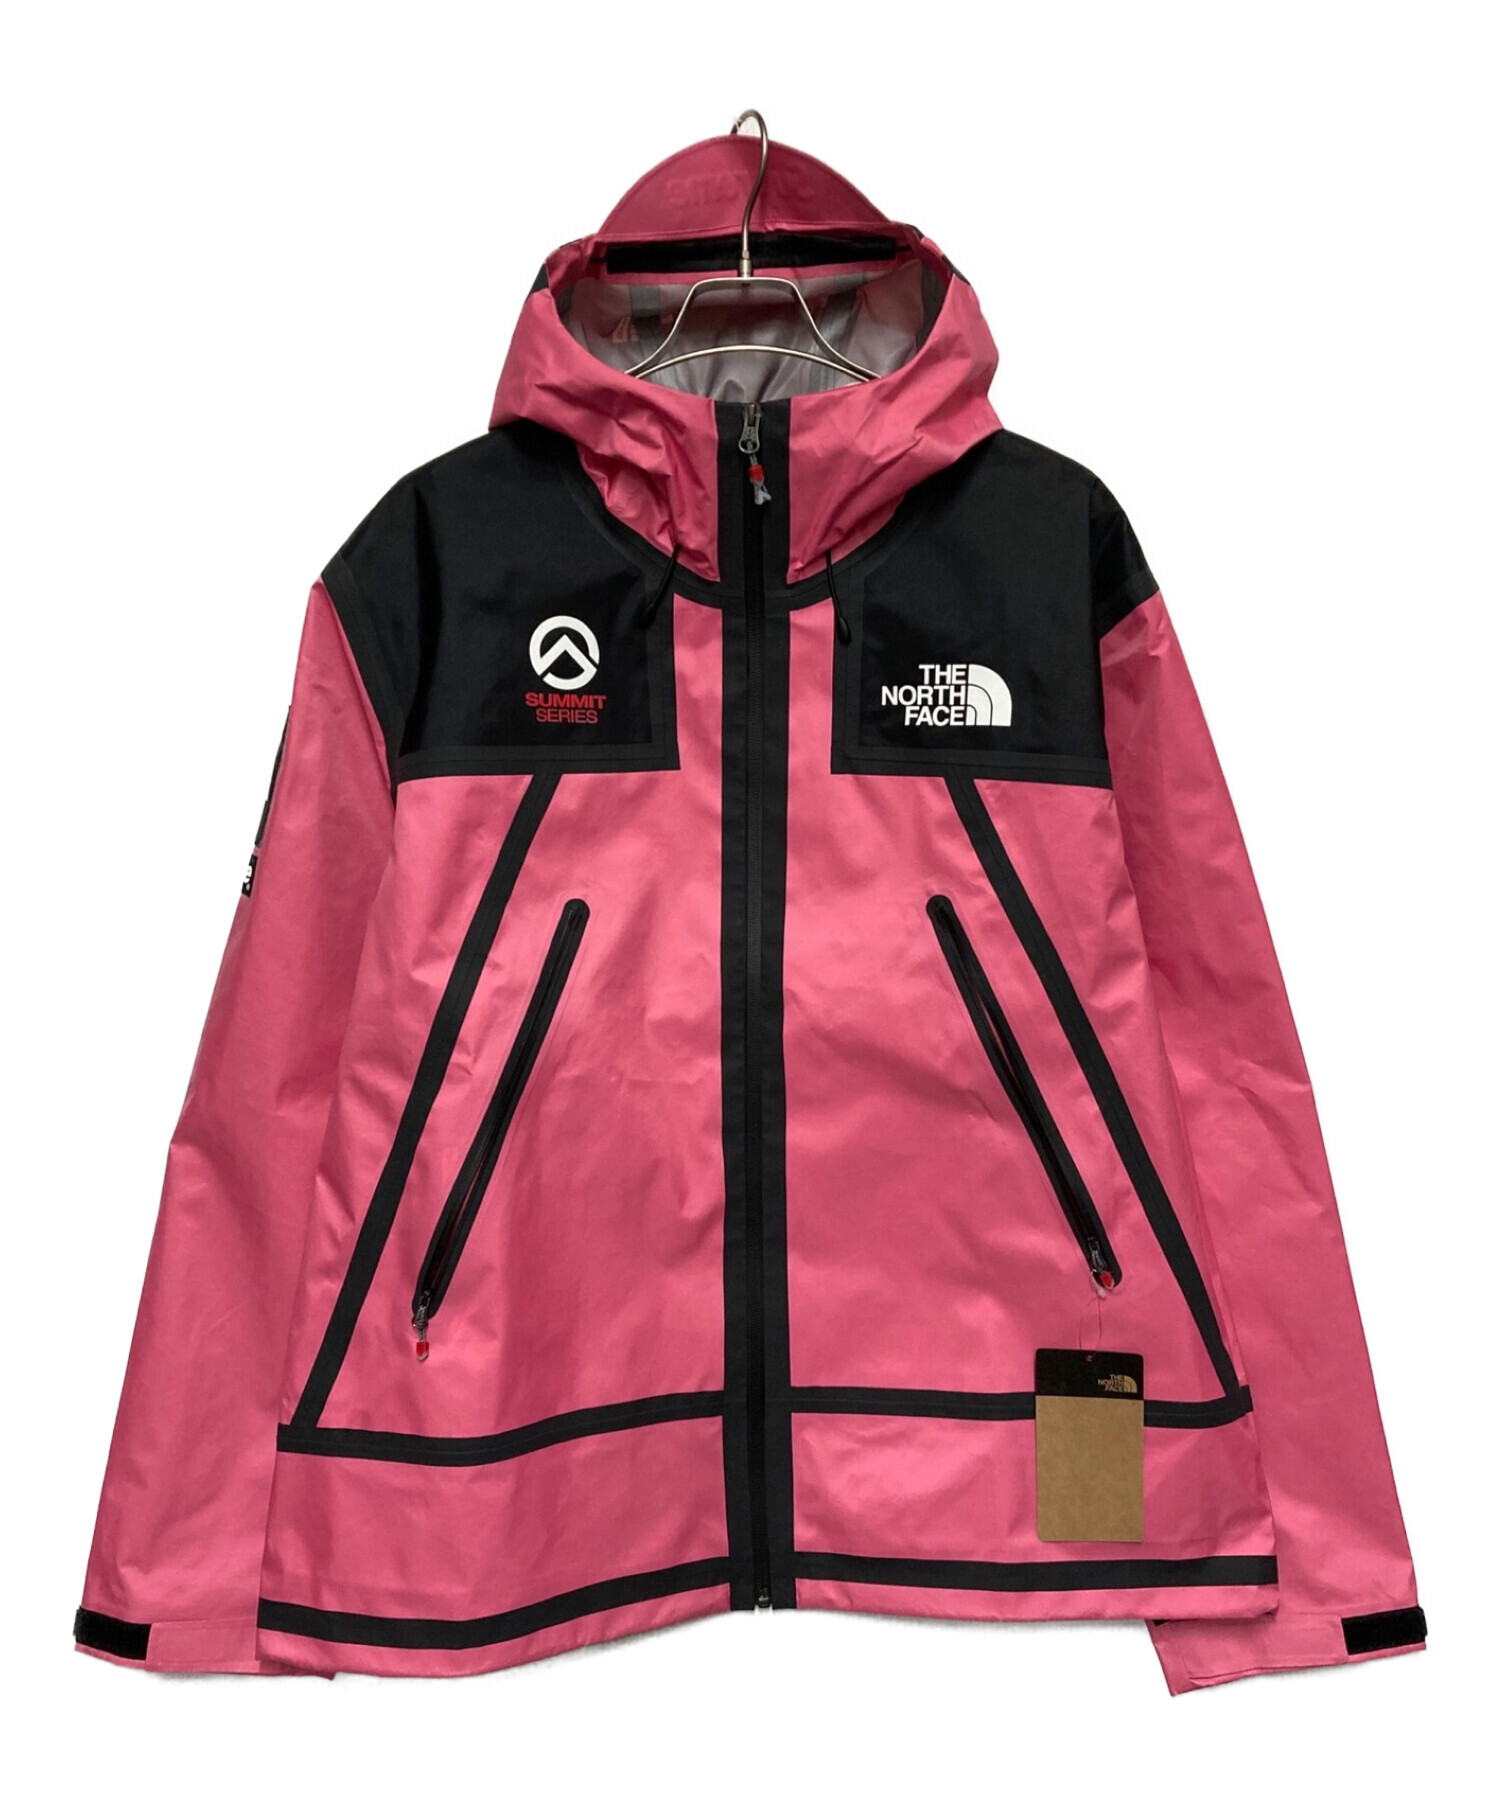 THE NORTH FACE×Supreme (ザノースフェイス×シュプリーム) SUMMIT SERIES OUTER TAPE SEAM  MOUNTAIN JACKET ピンク サイズ:XL